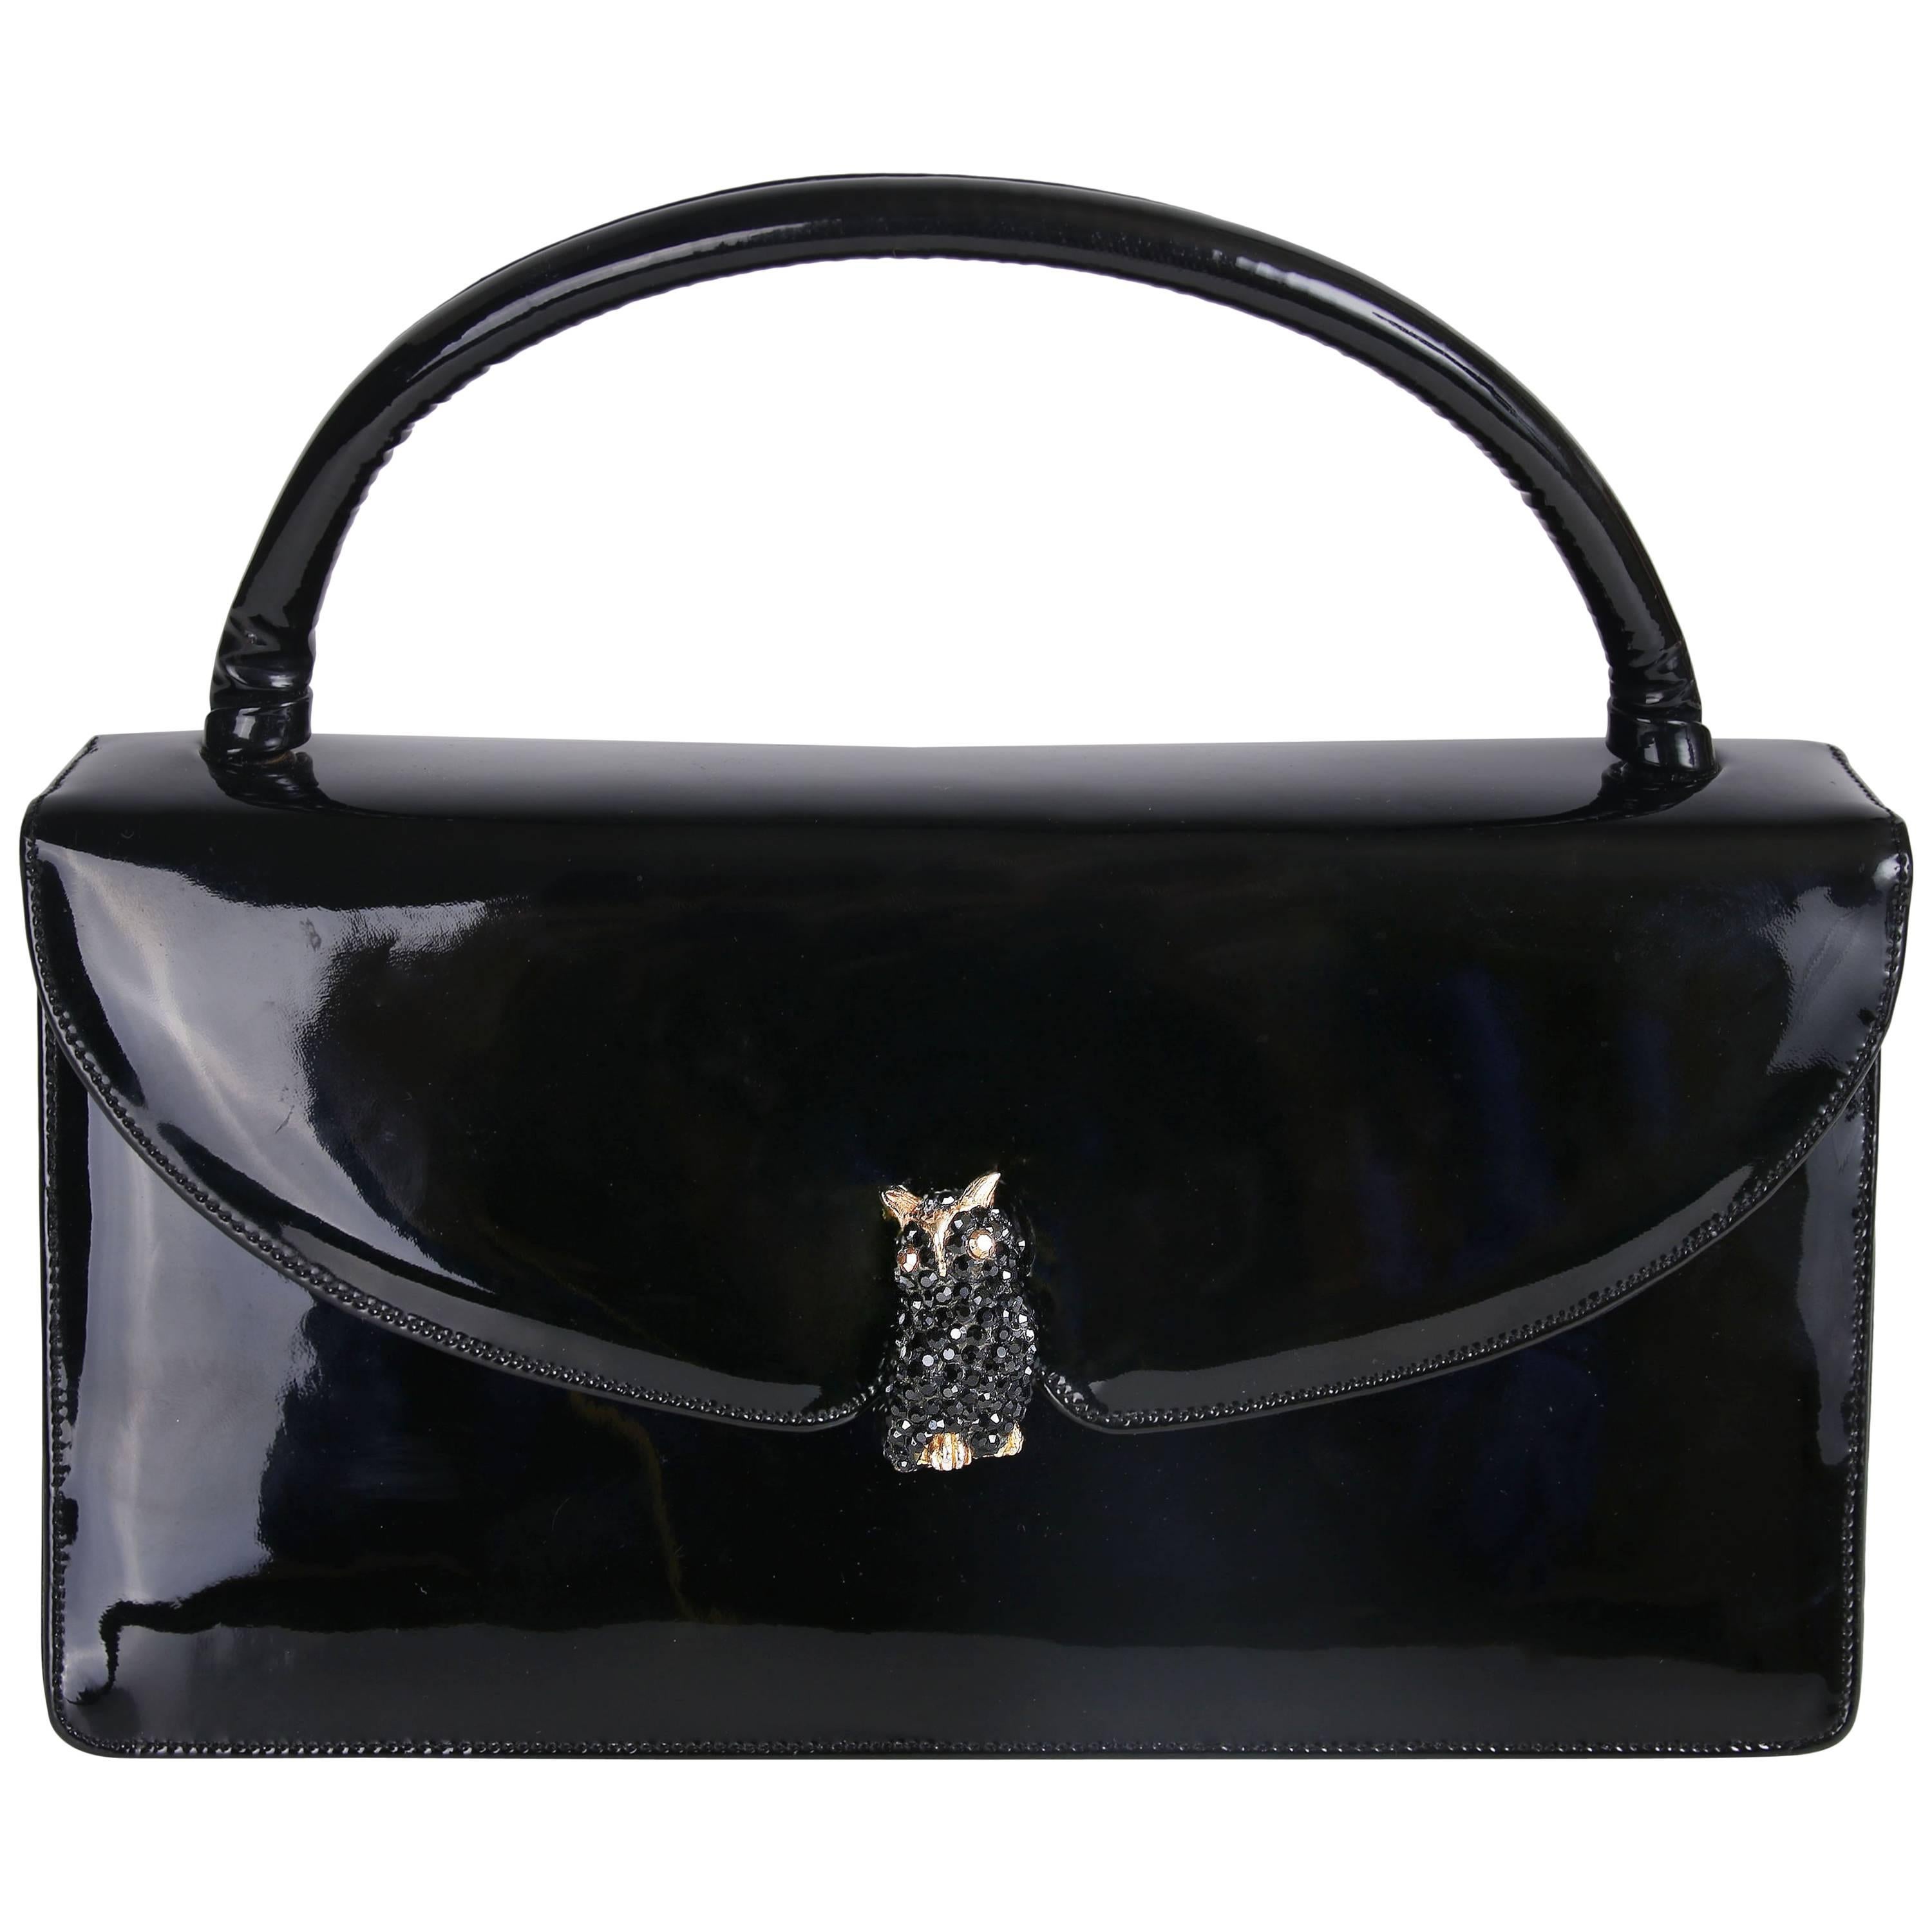 Judith Leiber Vintage Black Patent Leather Clutch Handbag With Owl Clasp